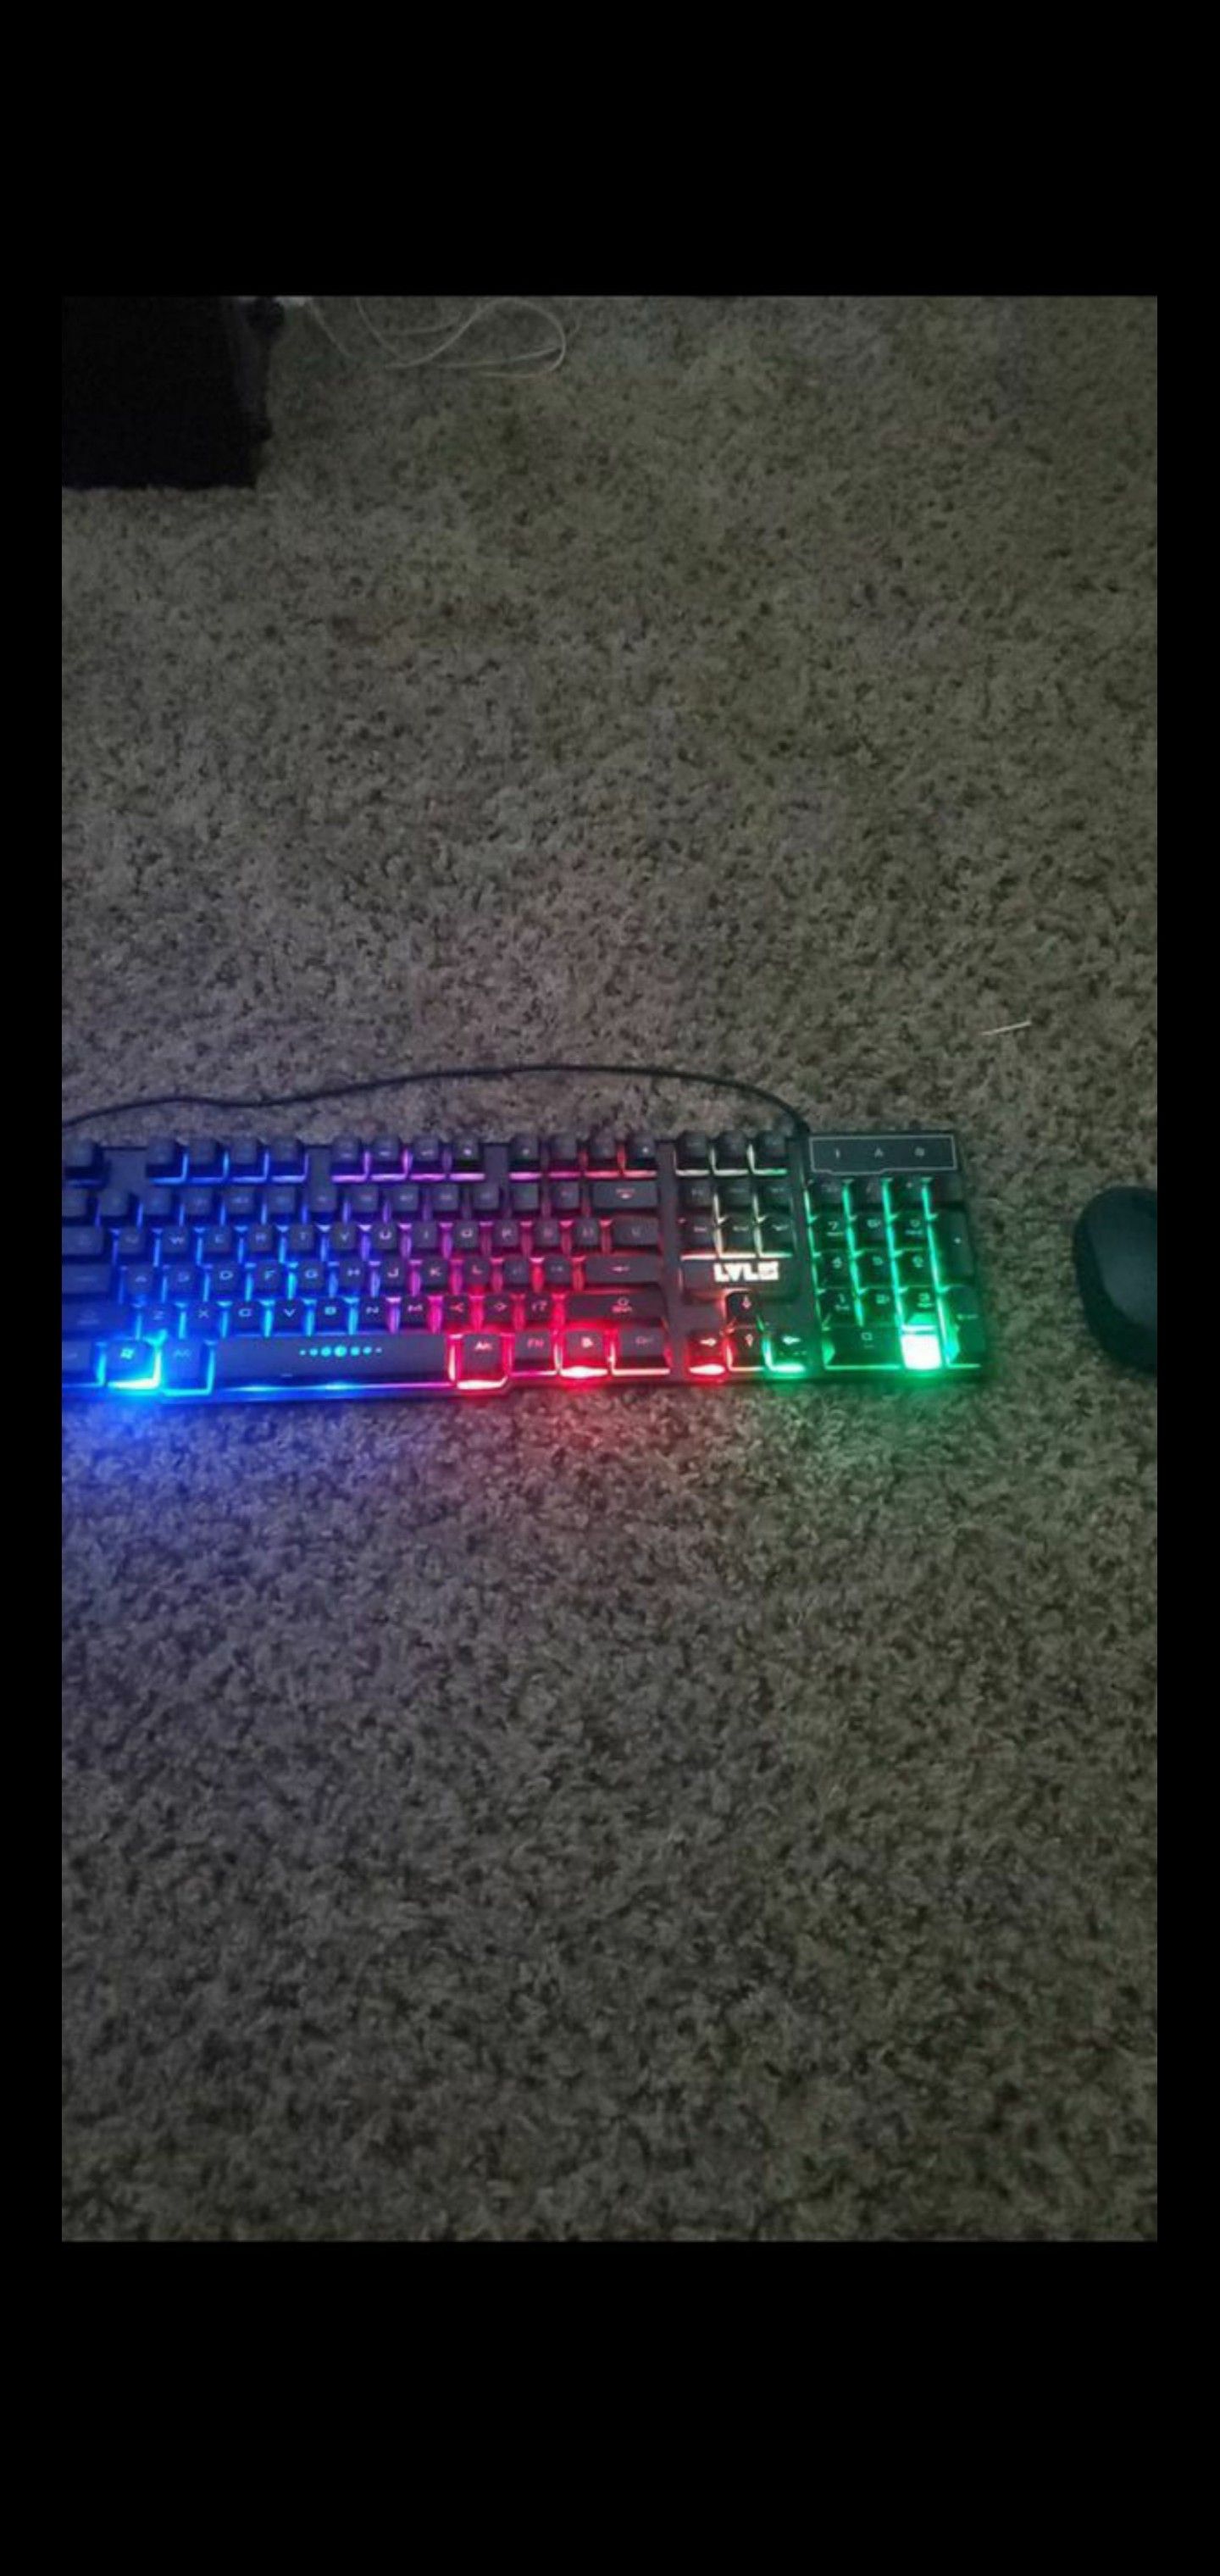 Gaming Keyboard and mouse